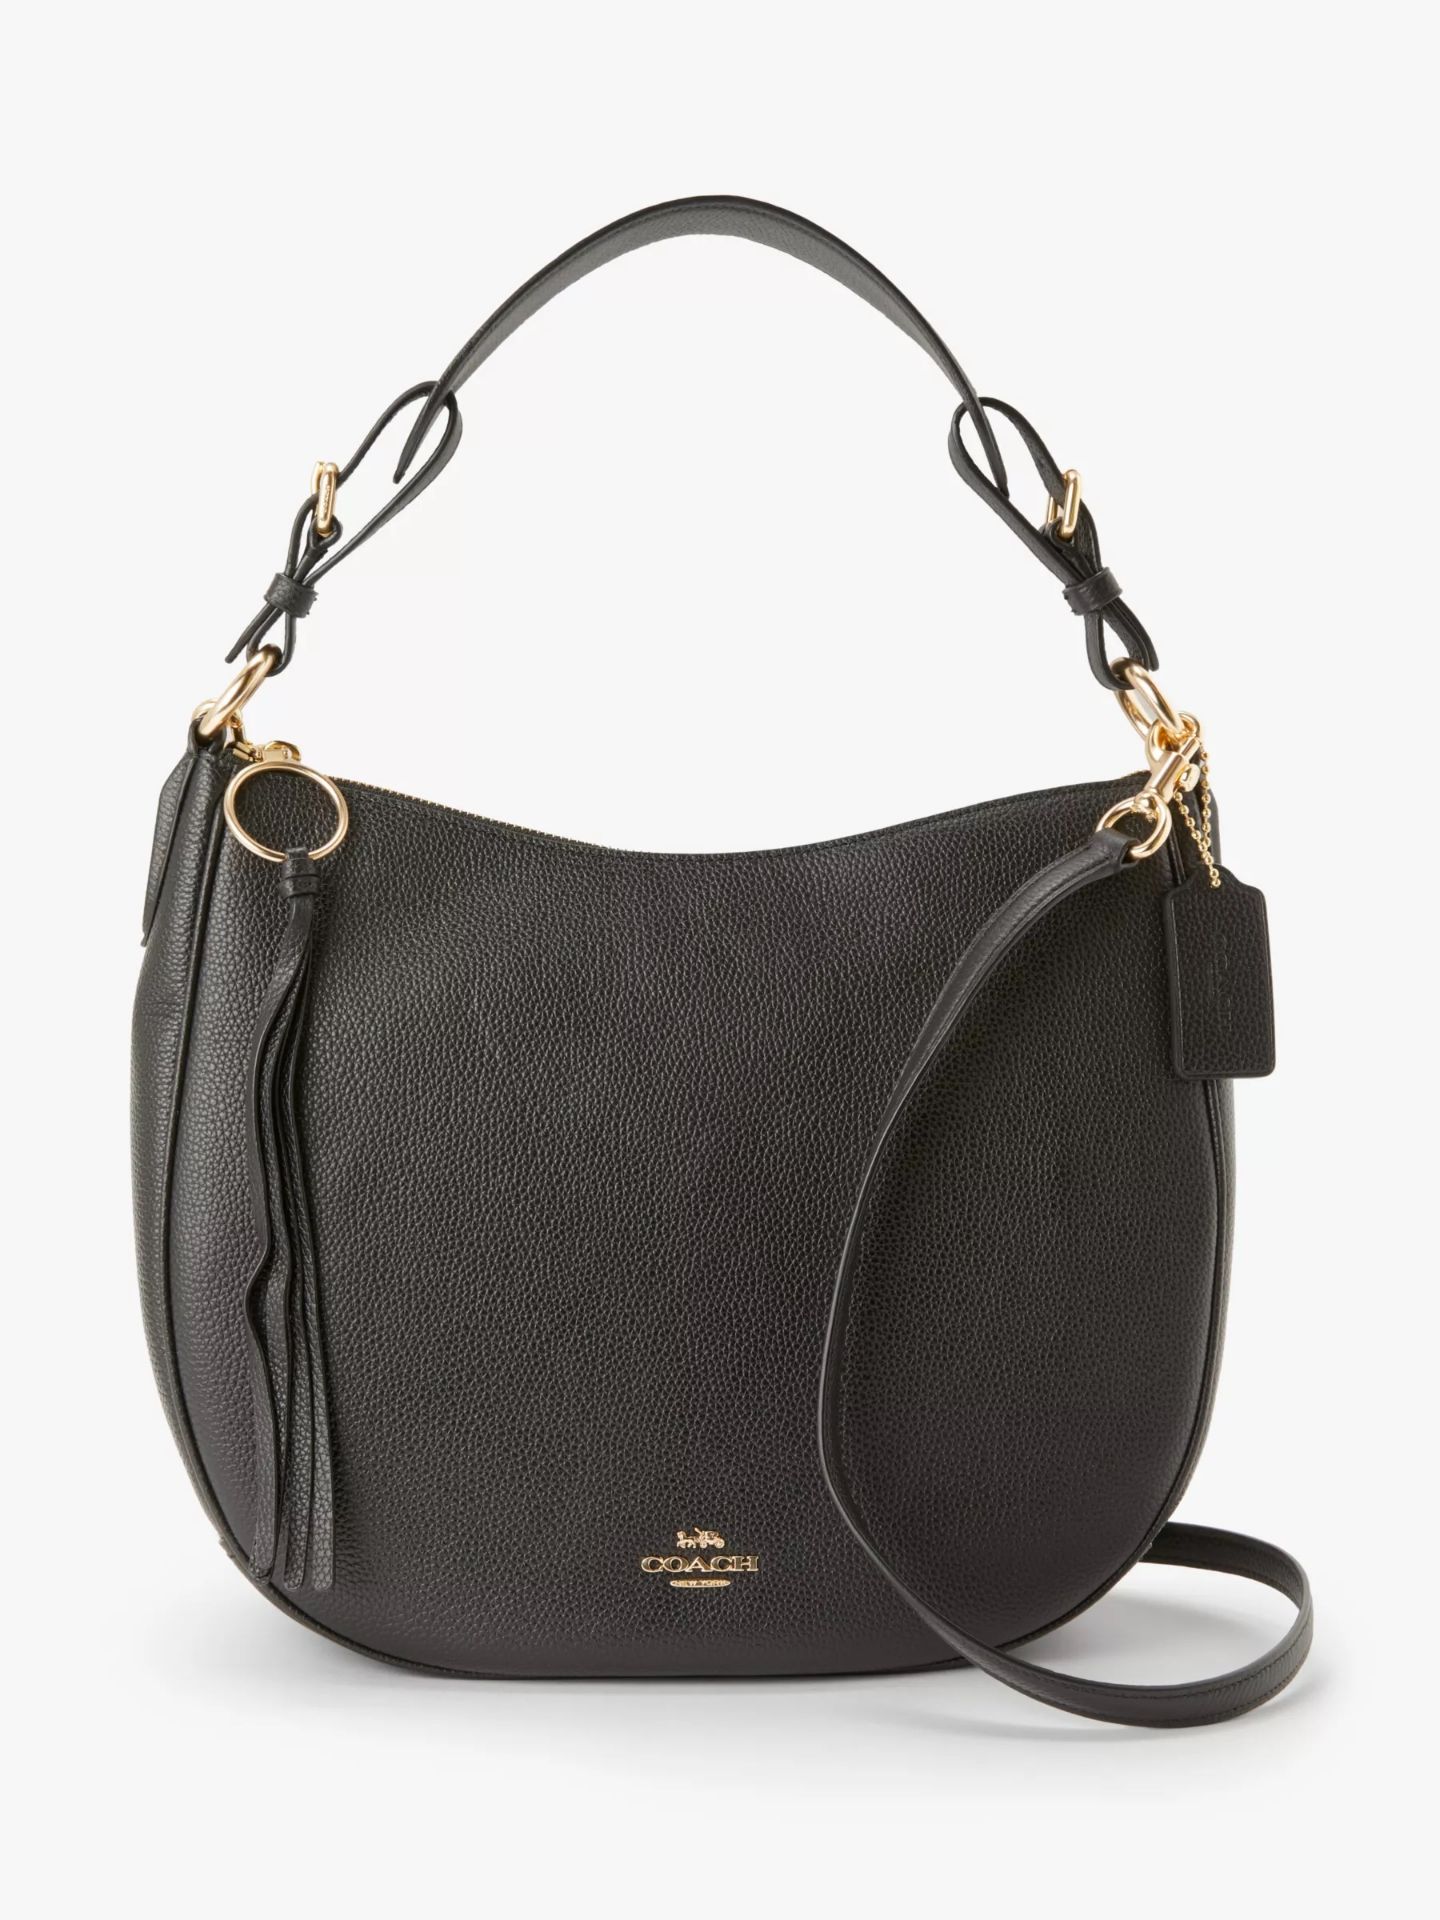 Coach Sutton Pebbled Leather Hobo Bag